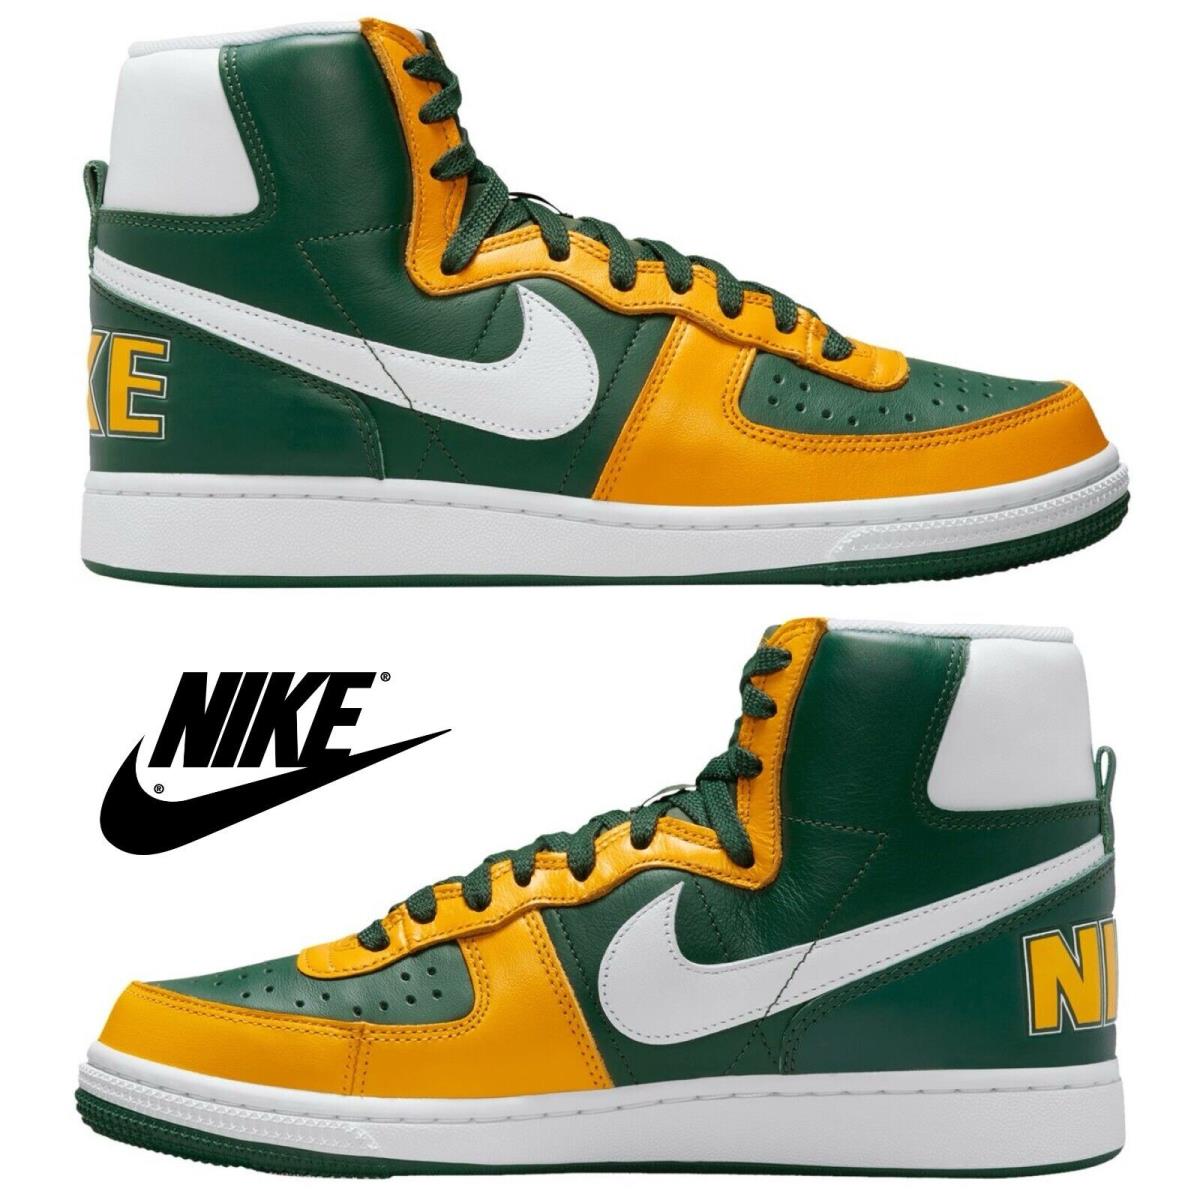 Nike Terminator High Men`s Basketball Shoes Sneakers Comfort Game Court Green